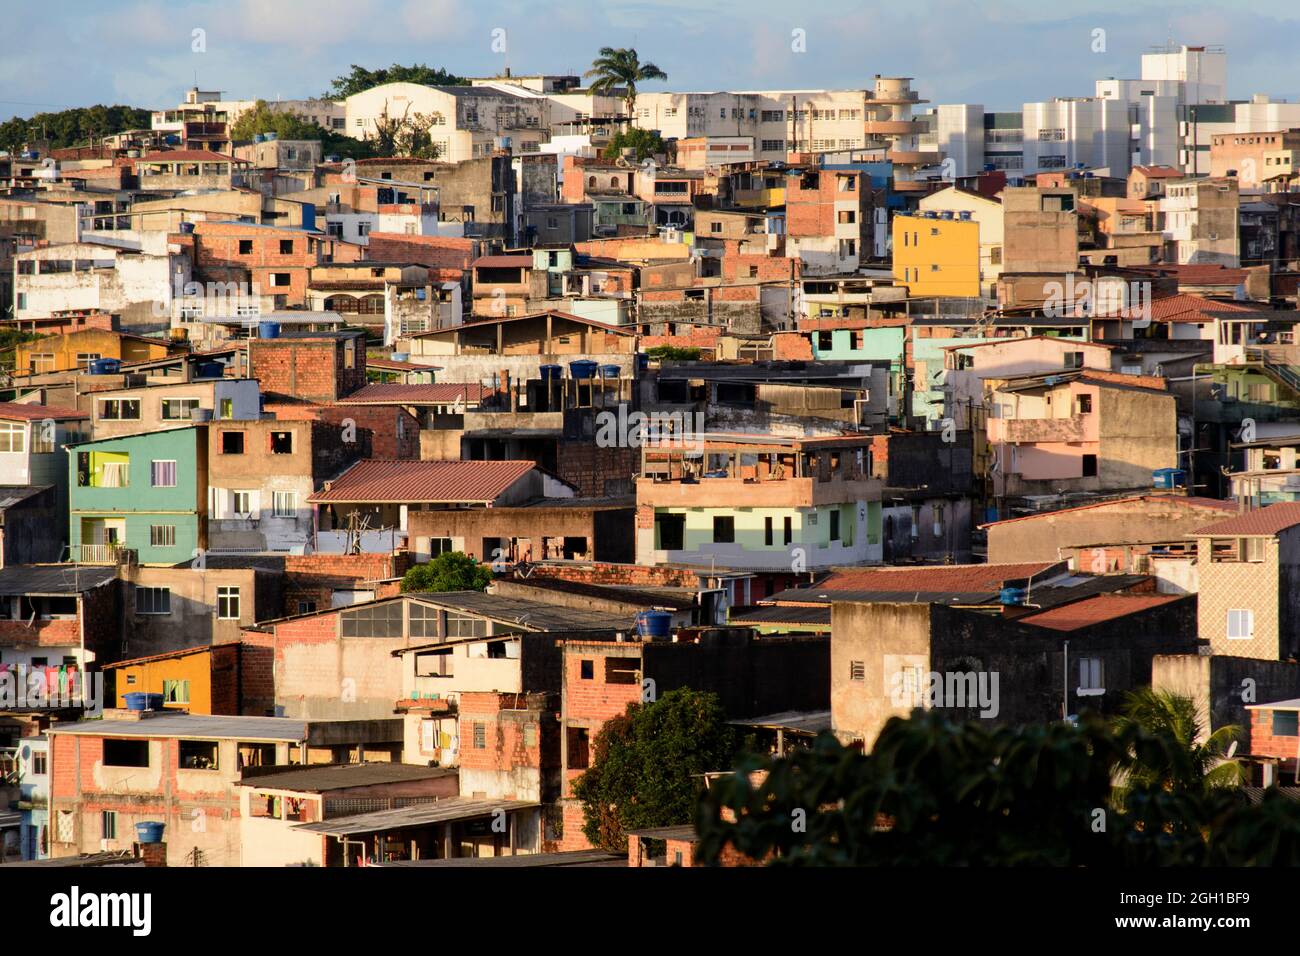 Salvador, Bahia, Brazil - March 05, 2014: View of popular houses built by the poorest people, without the support of the city government. Salvador, Ba Stock Photo